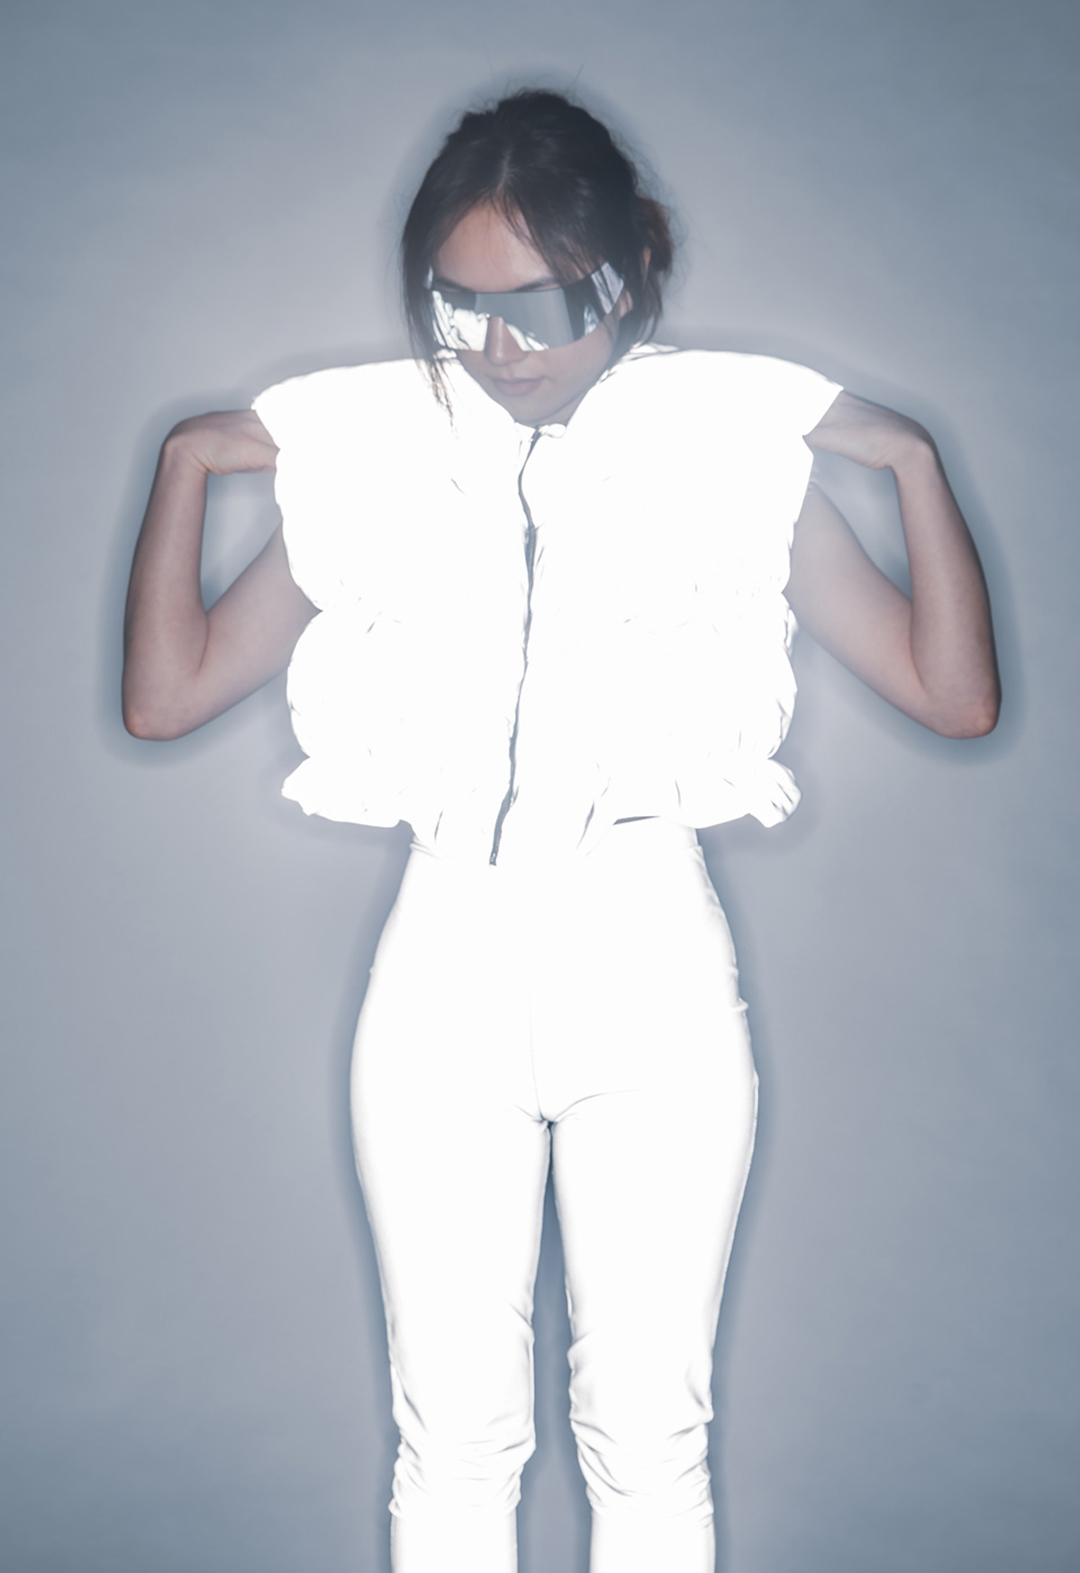 A model wearing a white vest and white pants, both made of fabric that is reflecting. The model is adjusting the shoulders of the vest. 